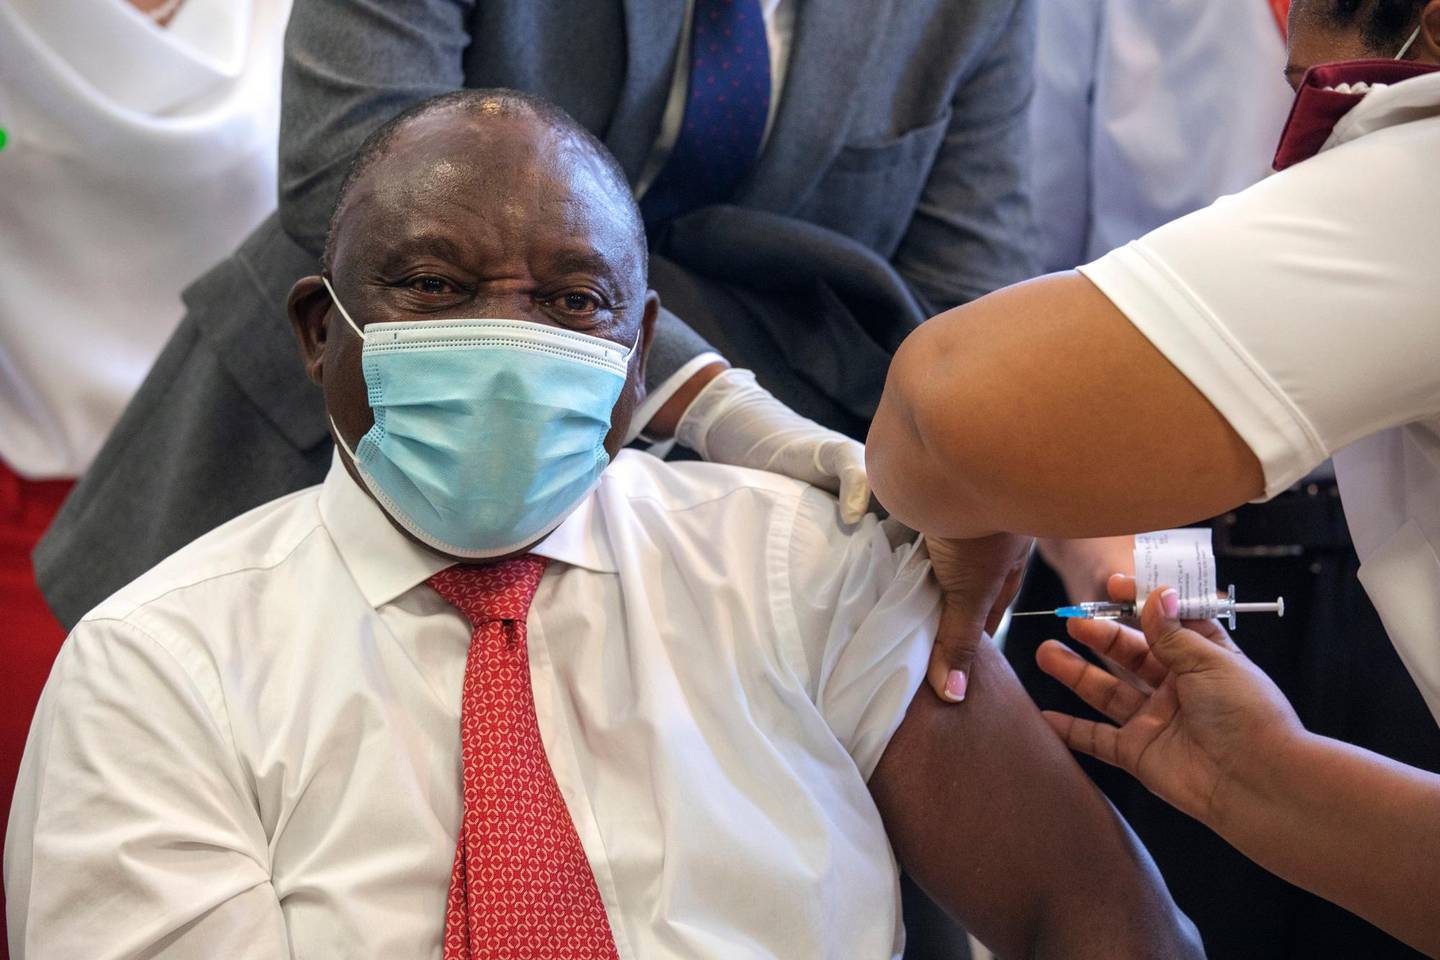 South African President Cyril Ramaphosa receives a Johnson and Johnson COVID-19 vaccine in Khayelitsha, Cape Town, South Africa, Wednesday, Feb. 17, 2021. Ramaphosa was among the first in his country to receive the vaccination to launch the inoculation drive in the country. (Gianluigi Guercia/Pool via AP)